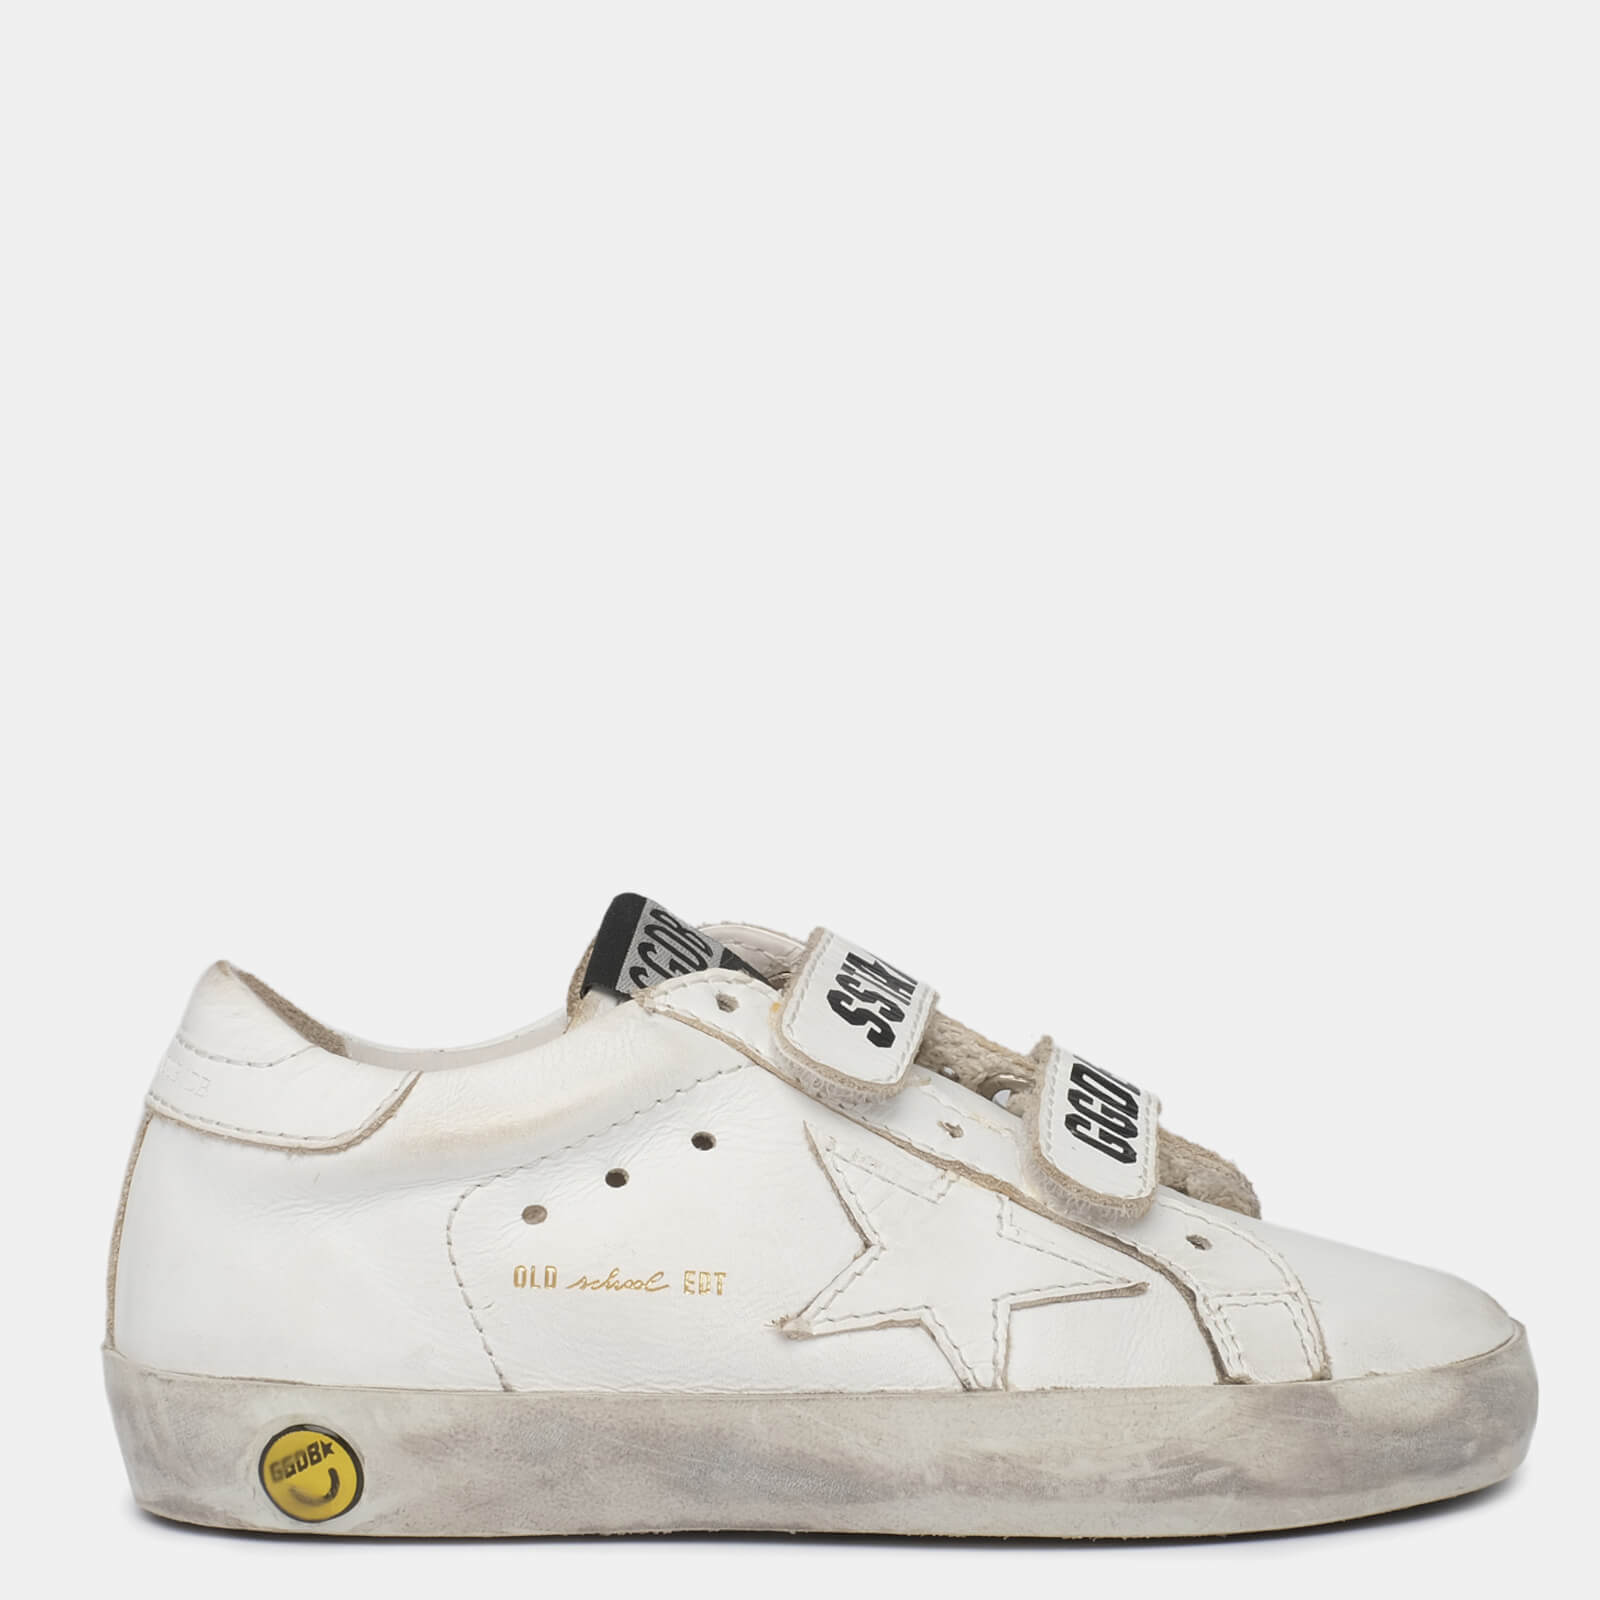 Golden Goose Toddlers' Old School Trainers - Optic White - UK 4.5 Toddler